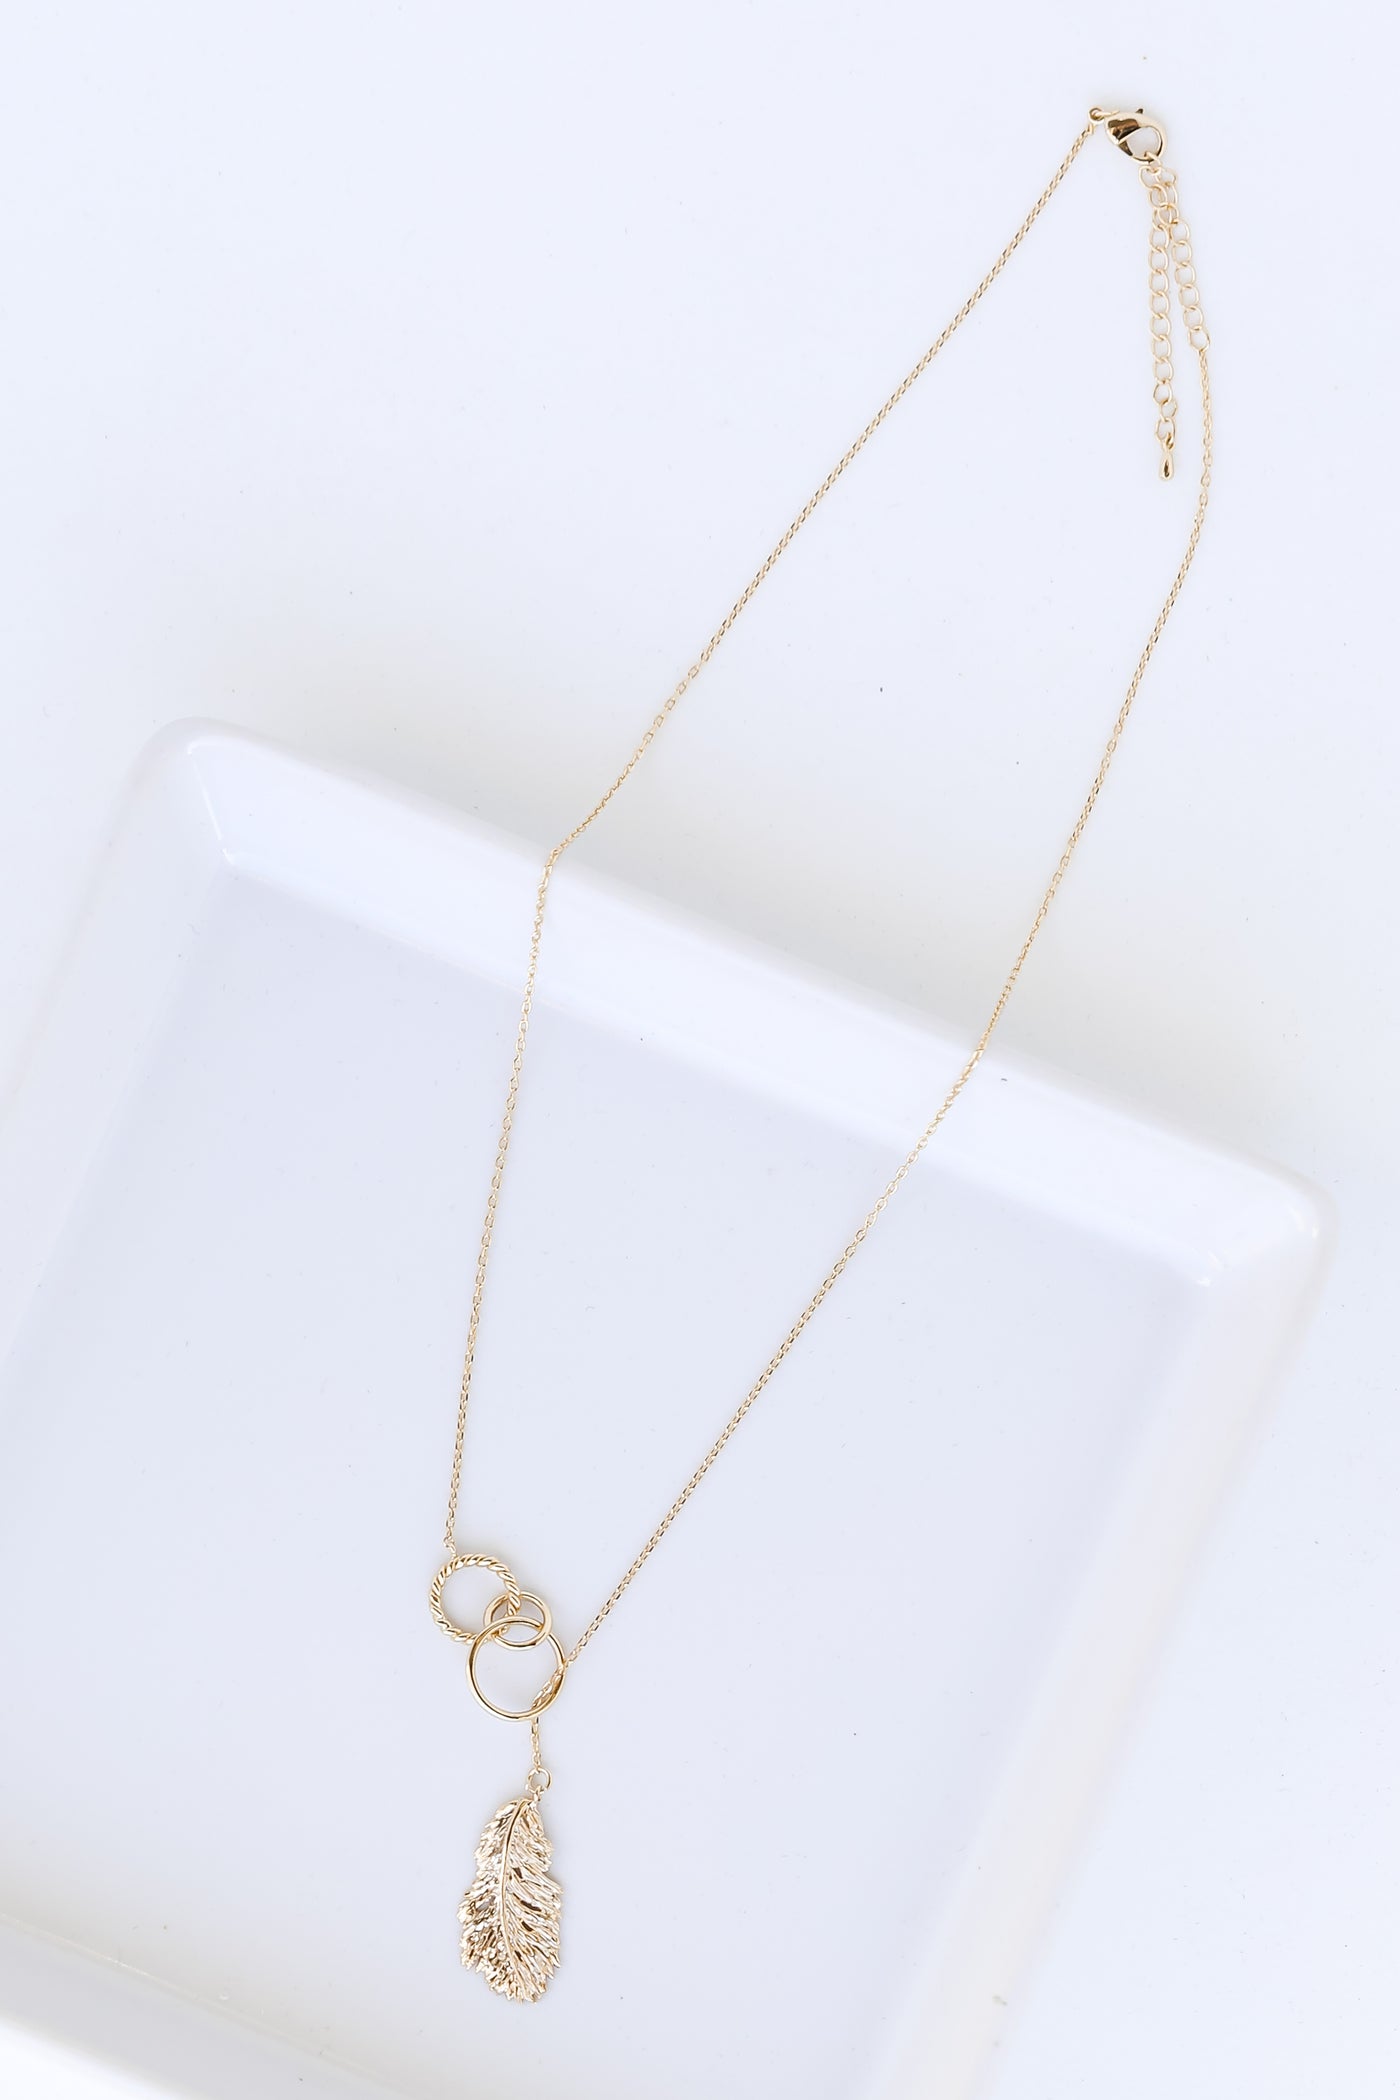 Gold Leaf Necklace flat lay